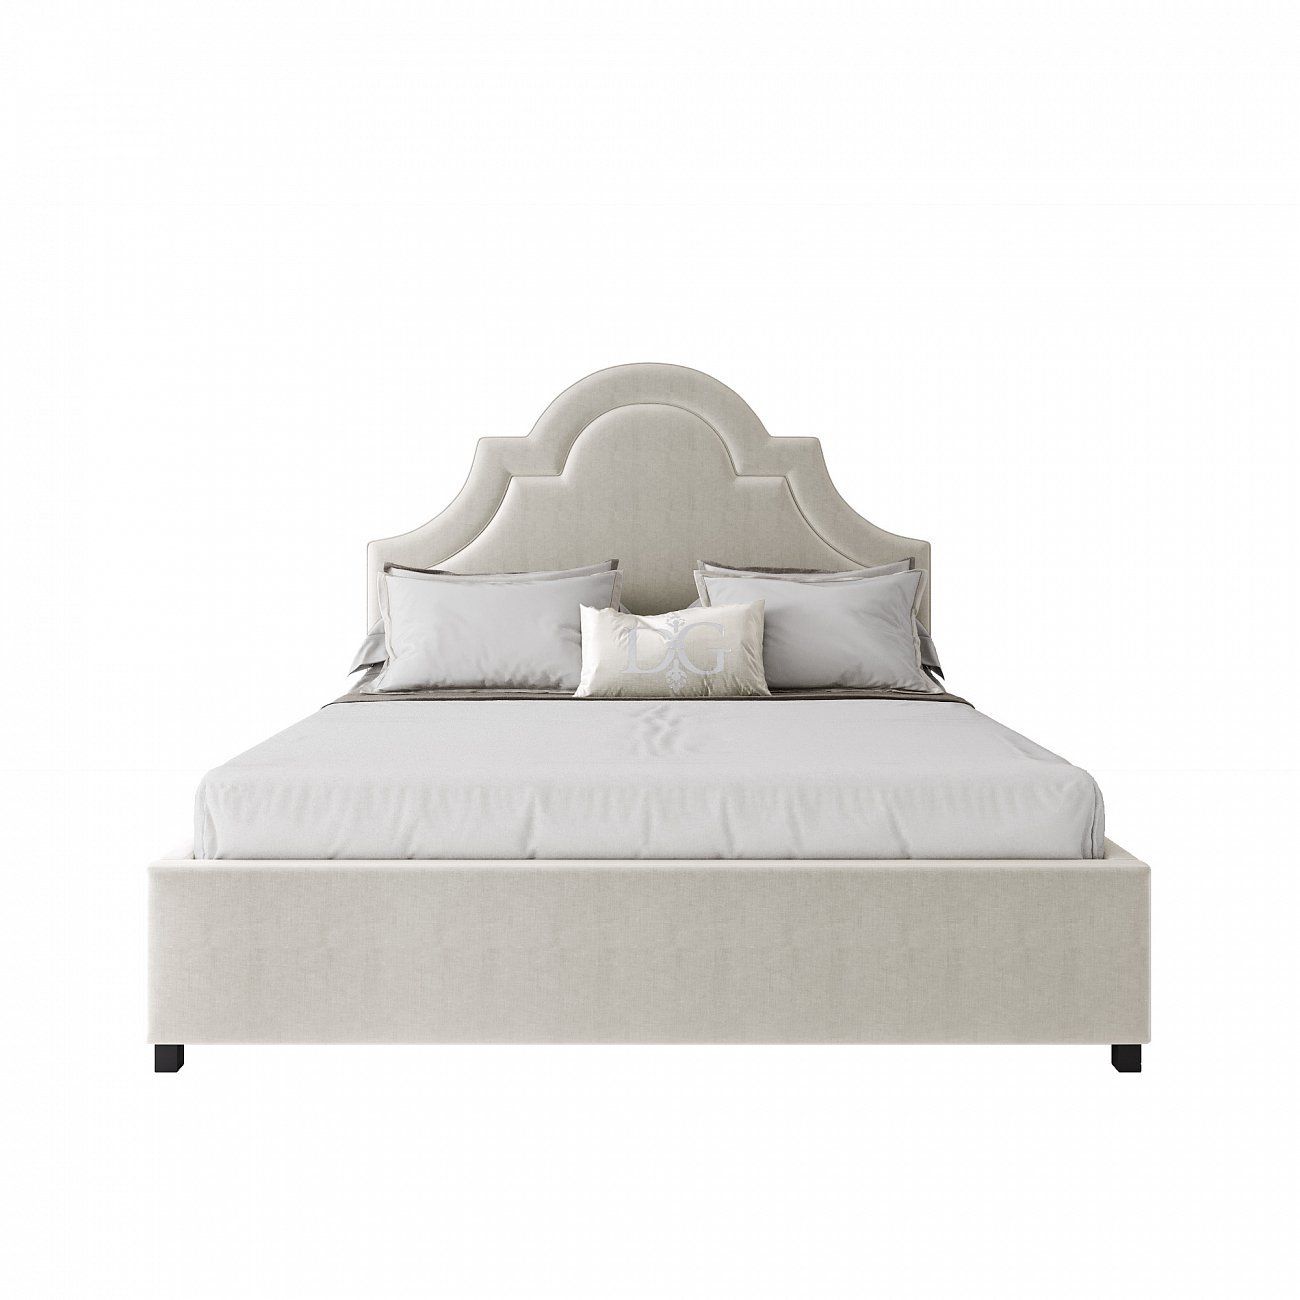 Kennedy Talc double bed 160x200 white